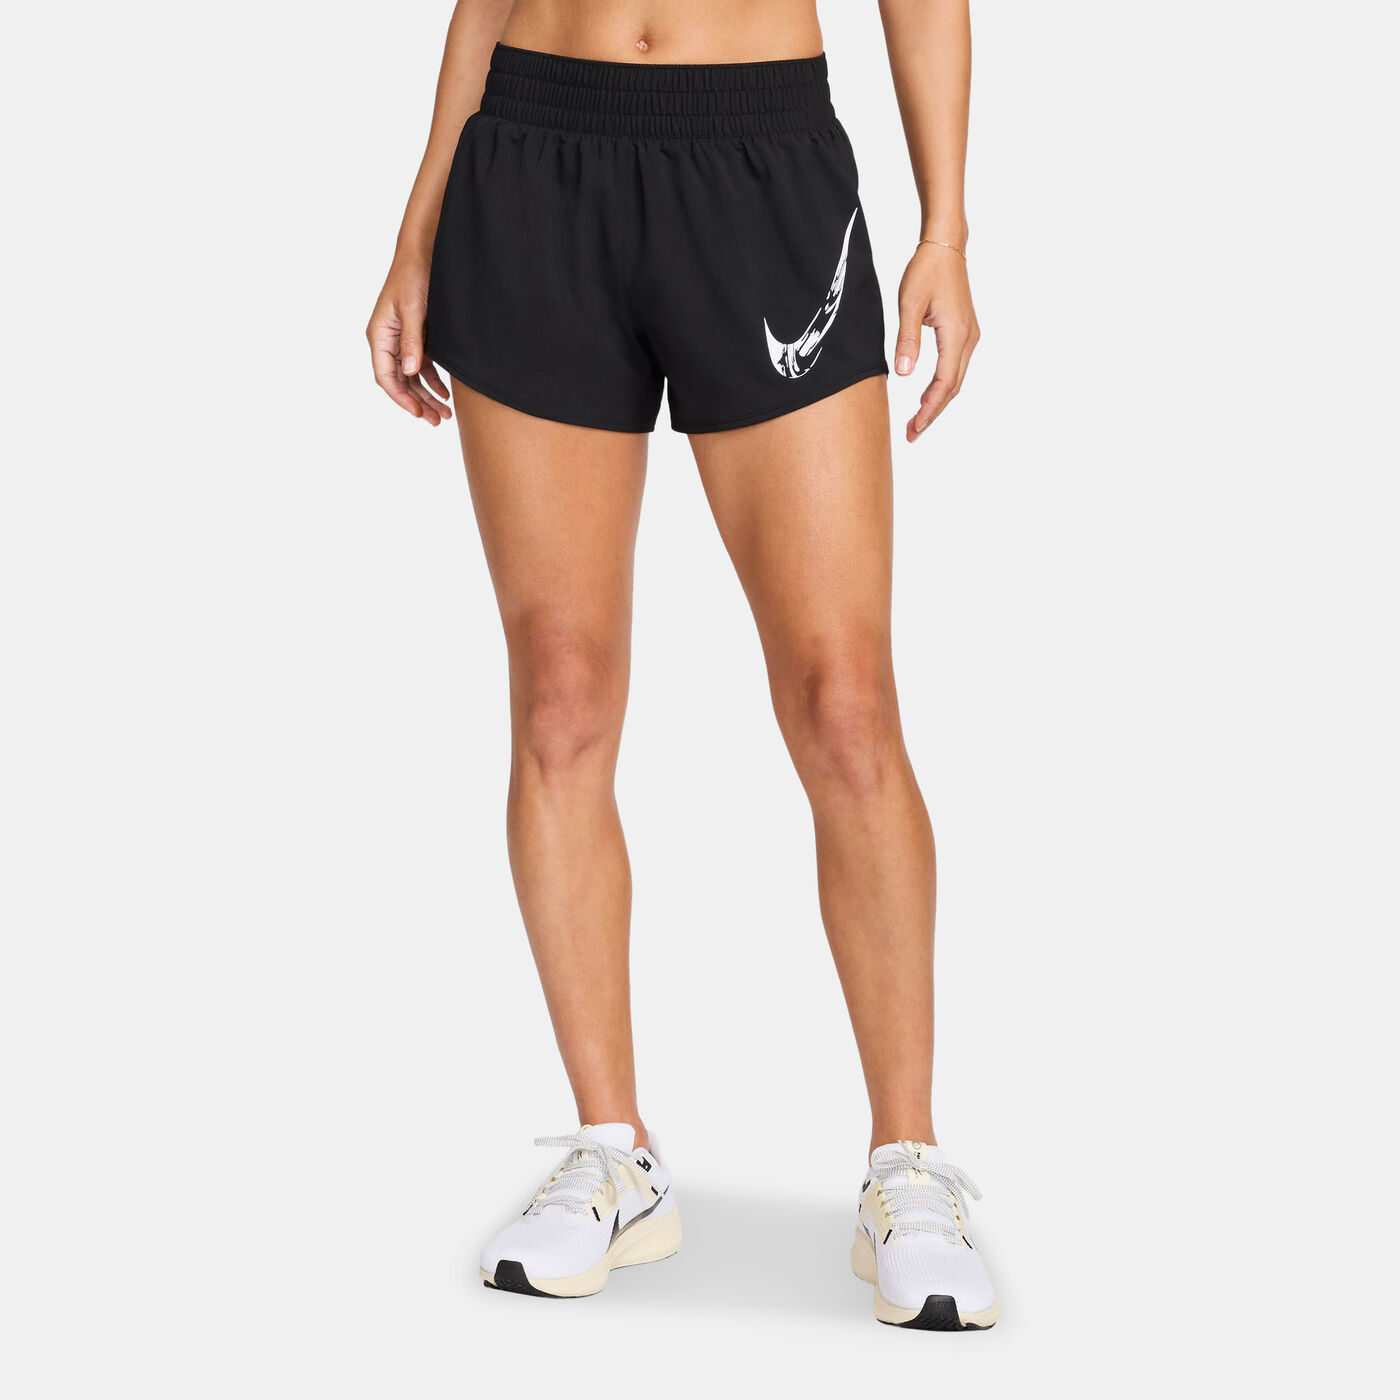 Women's One Dri-FIT Graphic Shorts